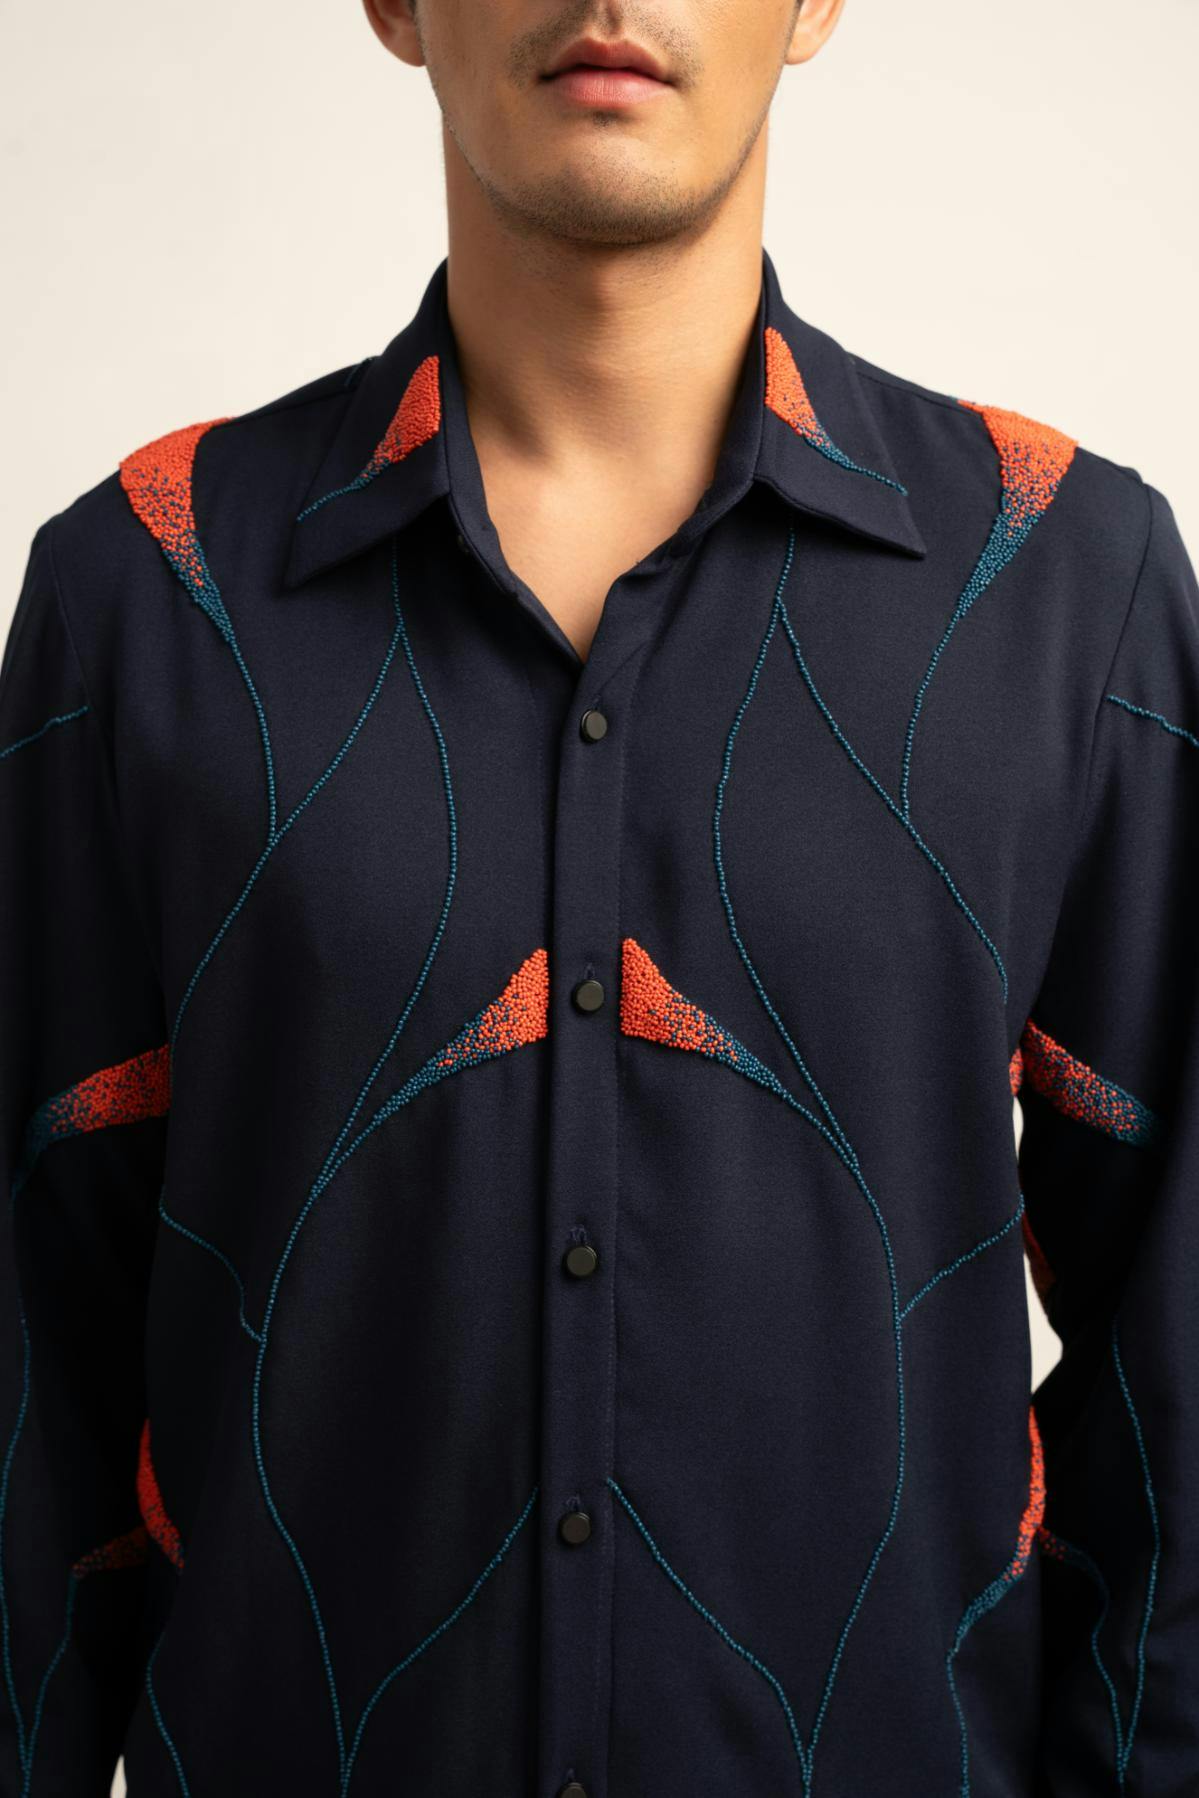 The Chromatic Shirt, a product by Siddhant Agrawal Label